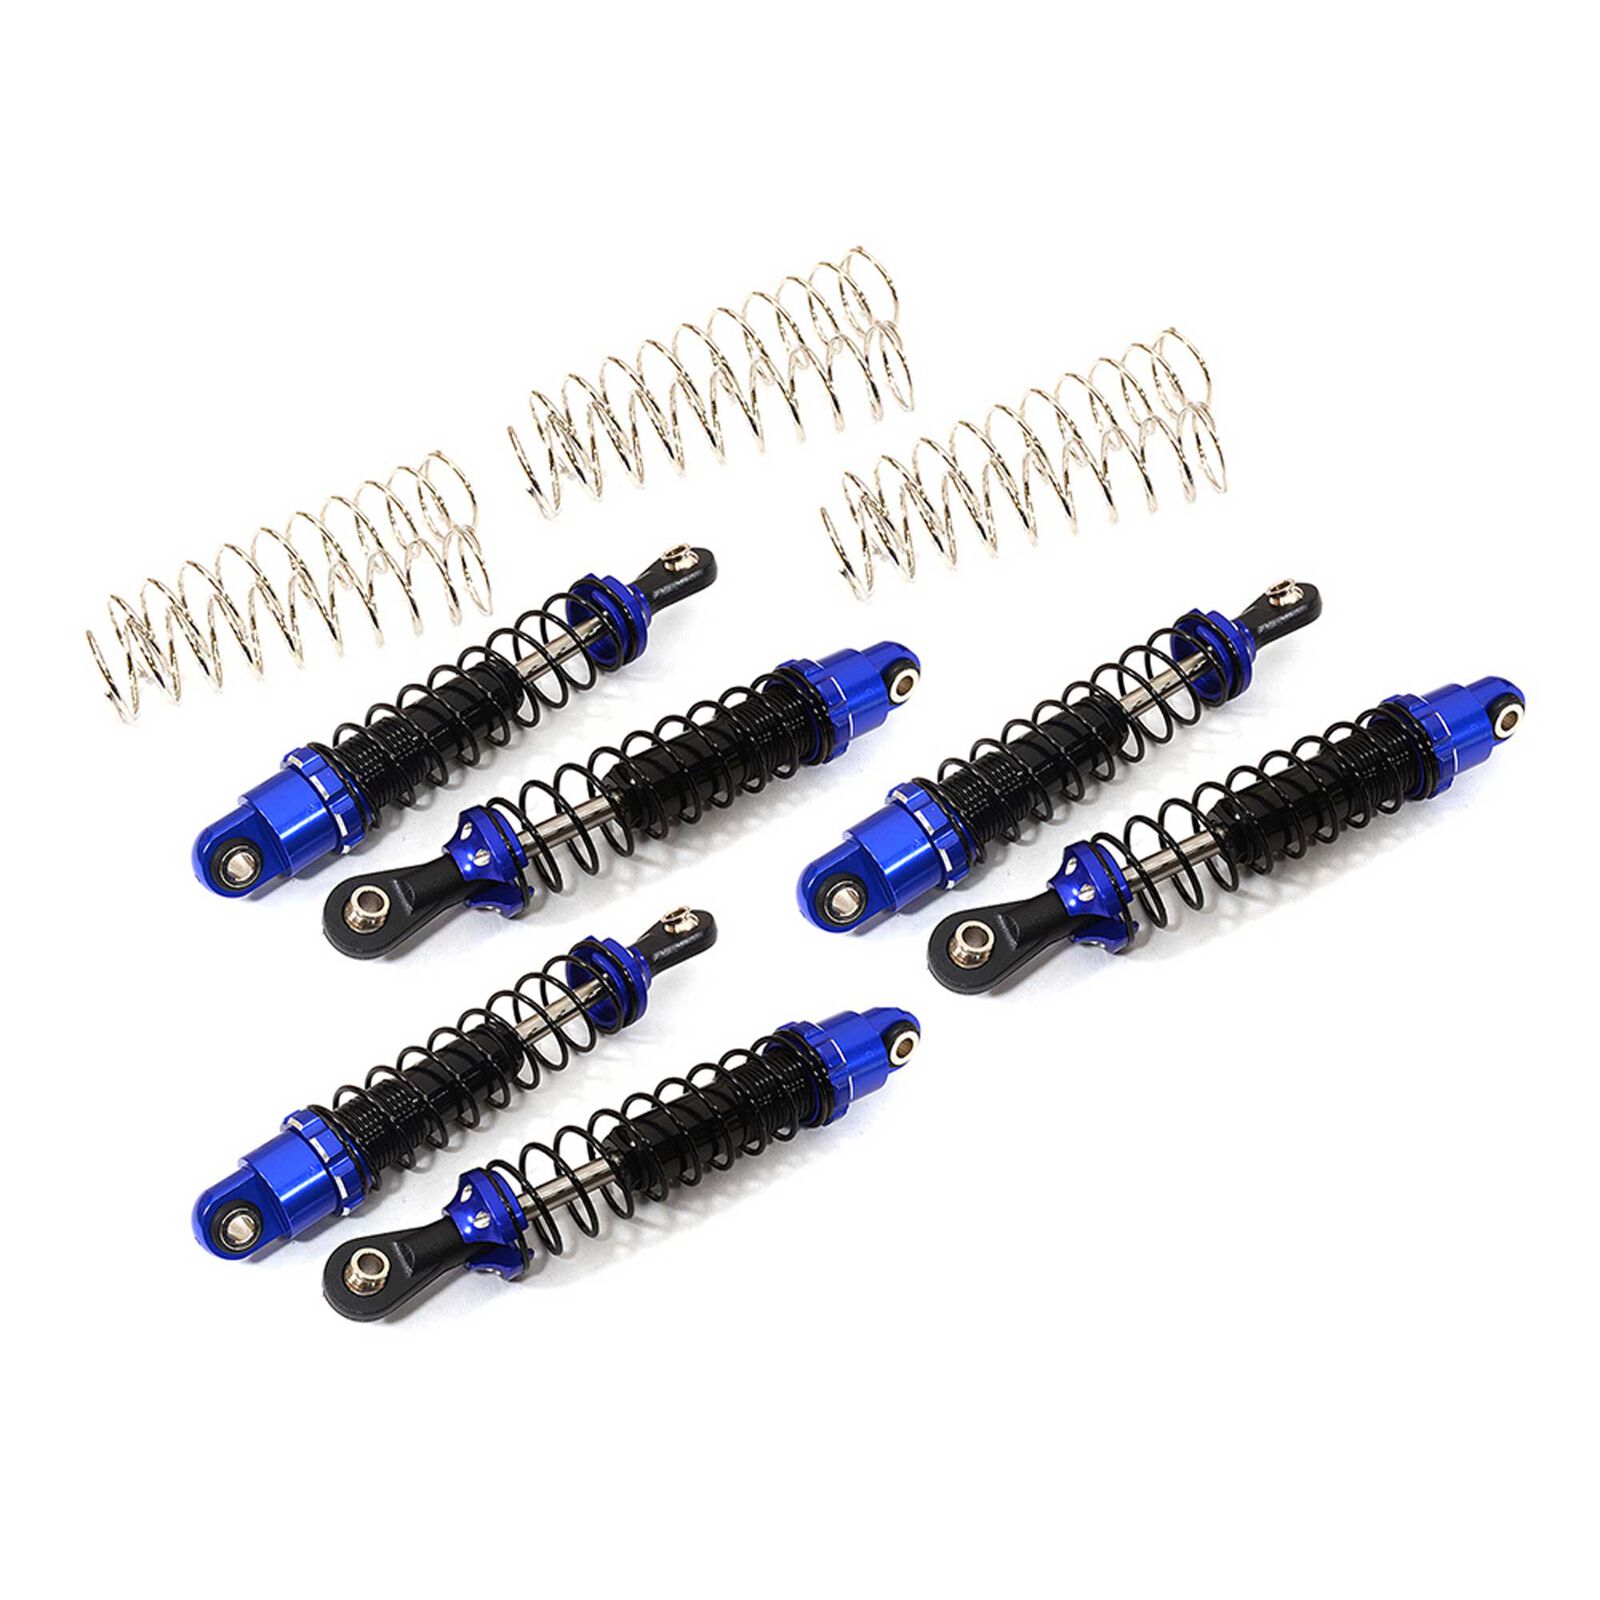 Shock Set for Axial SCX10 II 6X6 90mm, Blue (6)